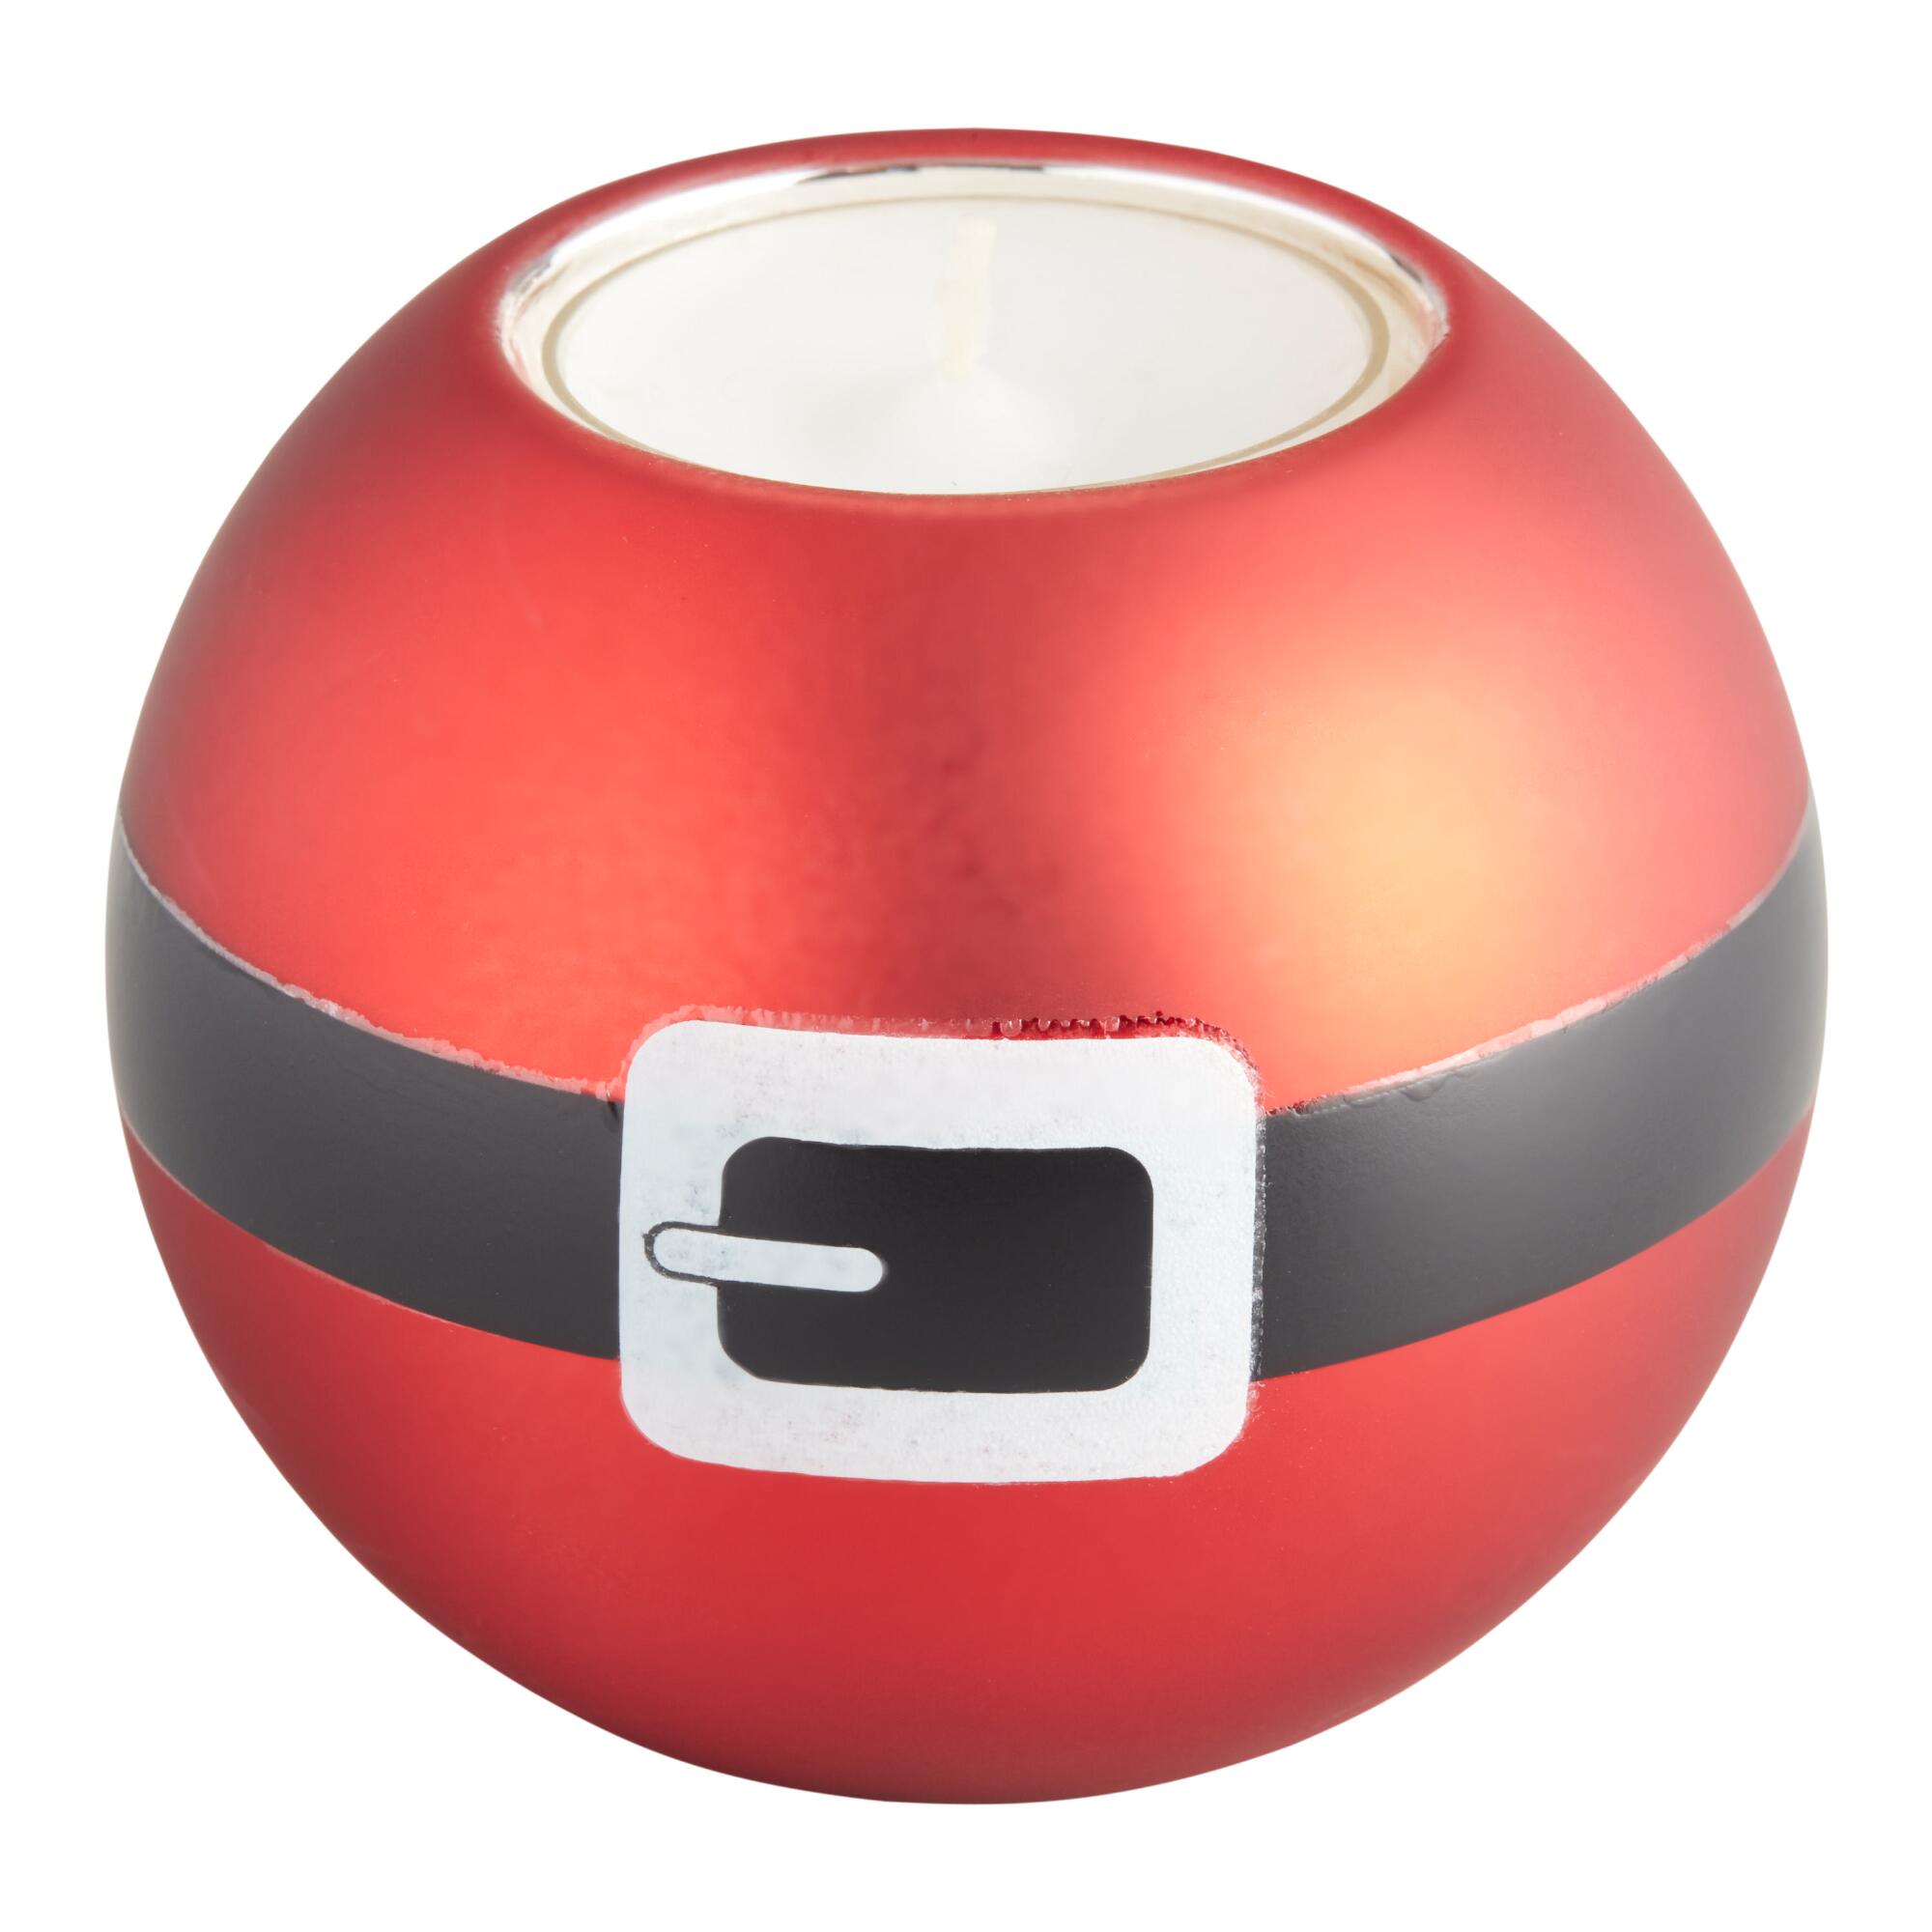 Pier Place Round Santa Claus Tealight Candleholder: Black/Red - Glass by World Market